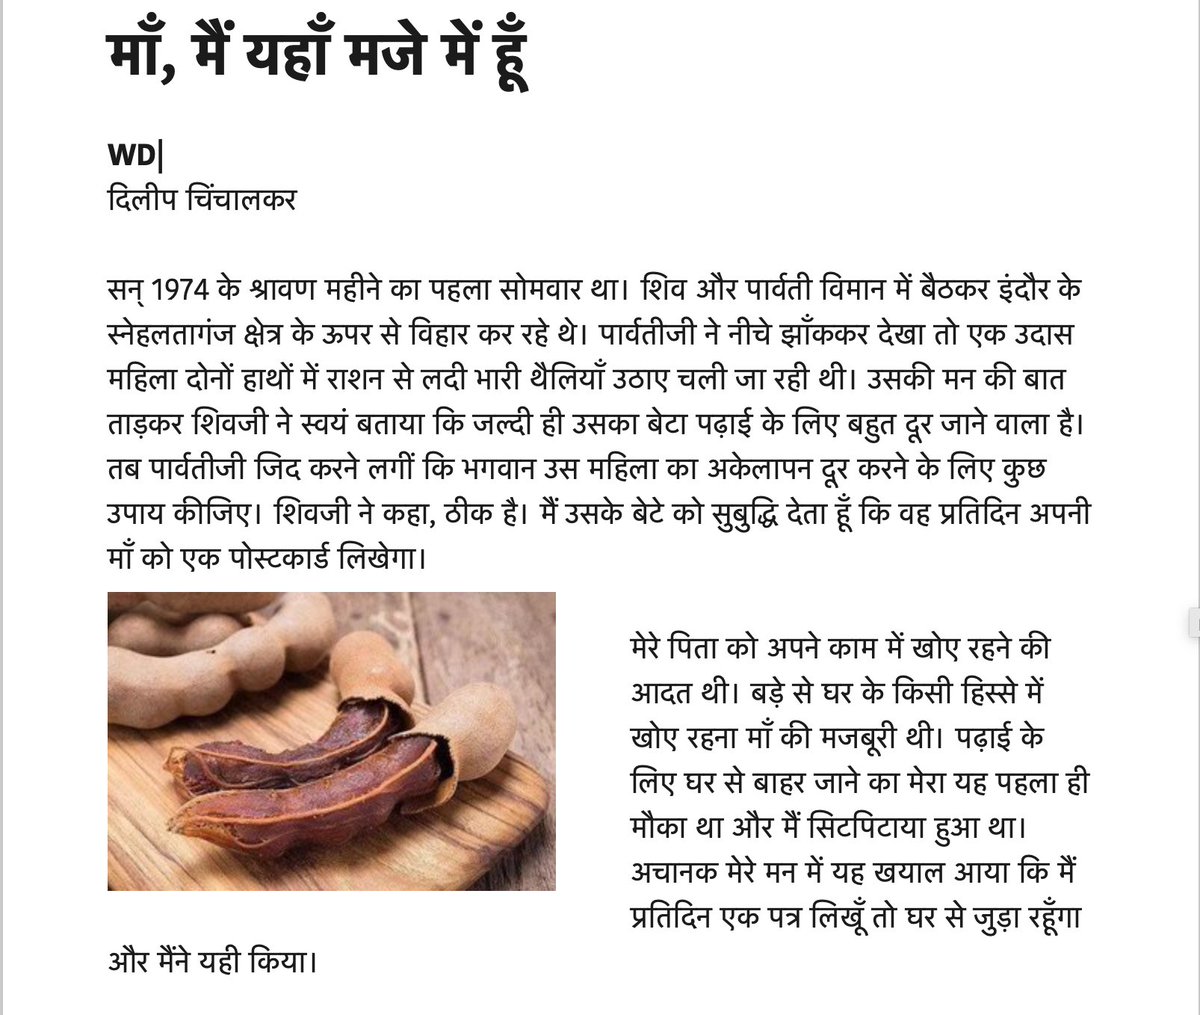 दिलीप जी की ये याद भी पढ़िए। लिंक:  https://bit.ly/DCletters  (You can read the screenshots or click the link for the story.)